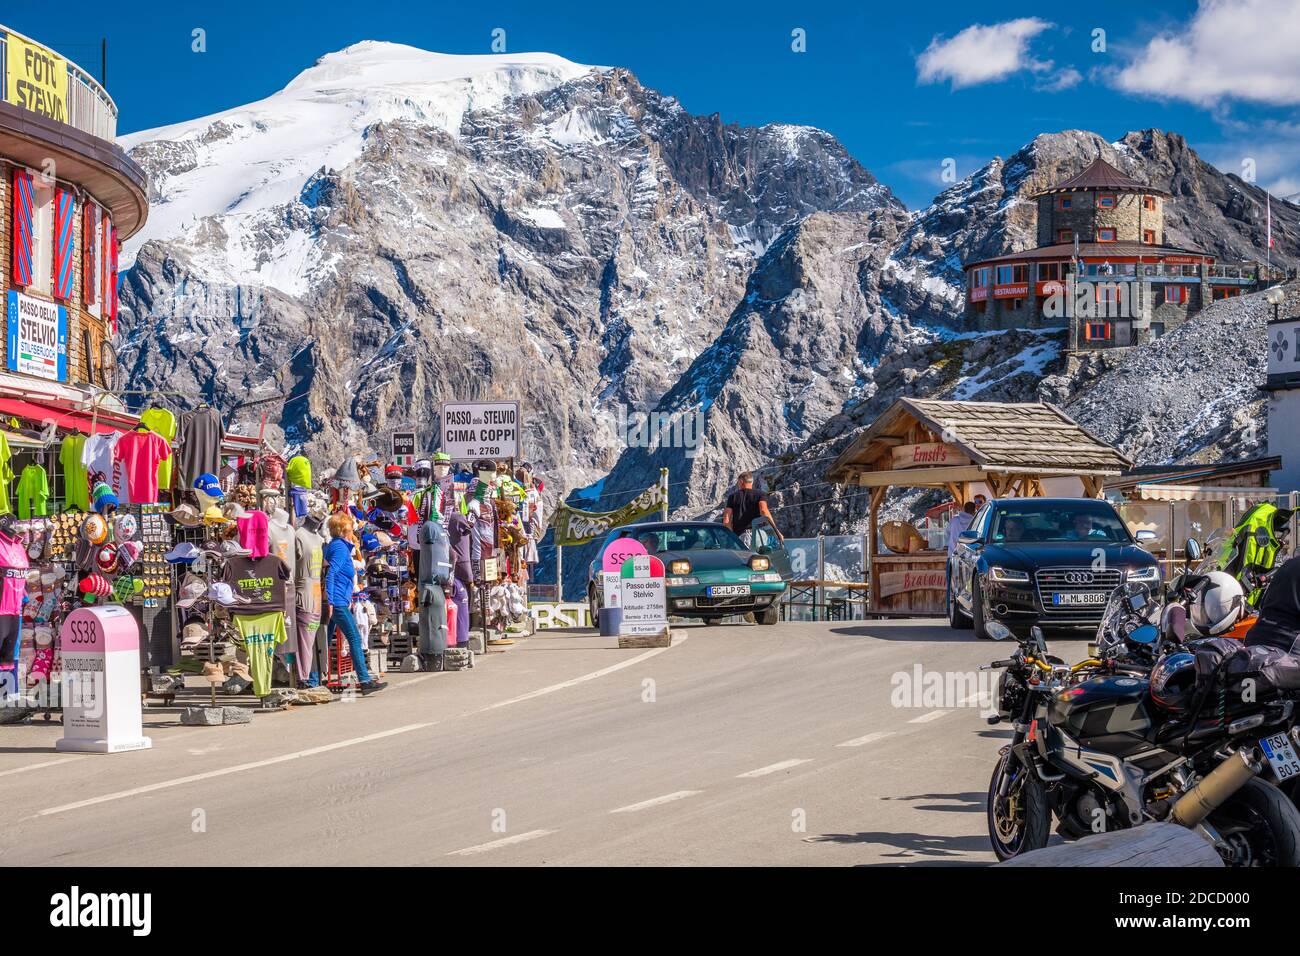 Stelvio Pass, Italy - September 18, 2019: The Stelvio Pass is a mountain pass in the Ortler alps in South Tyrol and connects to the Swiss Umbrail Pass Stock Photo